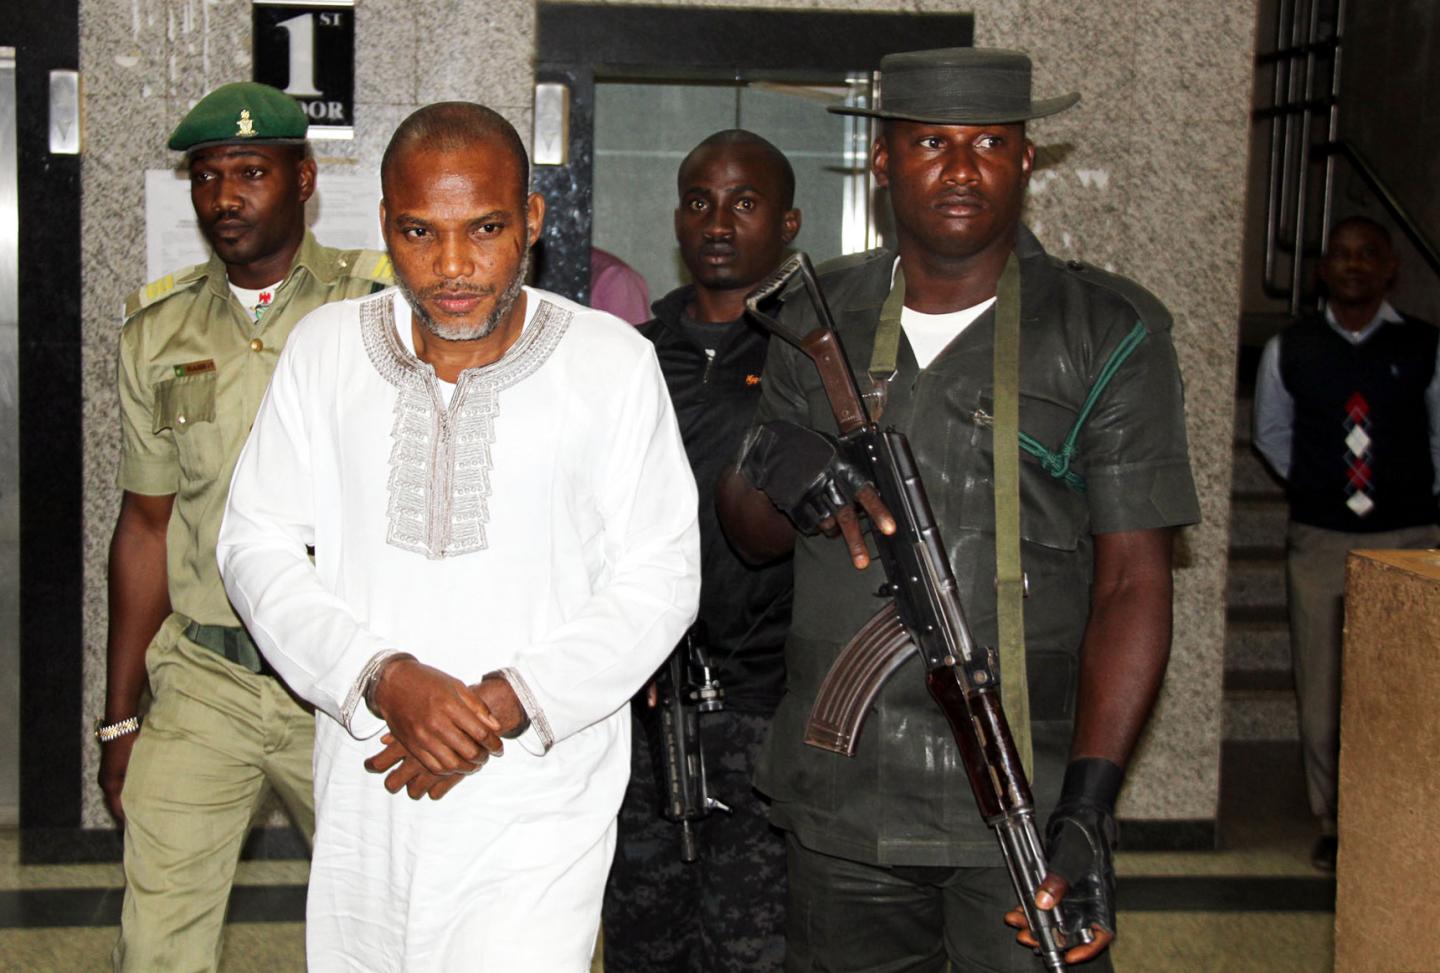 Leader of Indigenous Peoples of Biafra (IPOB), Nnamdi Kanu attends a trial on February 9, 2016. He is accused by the state of "propagating a secessionist agenda" with the intention to "levy war against Nigeria" and has been denied bail. 